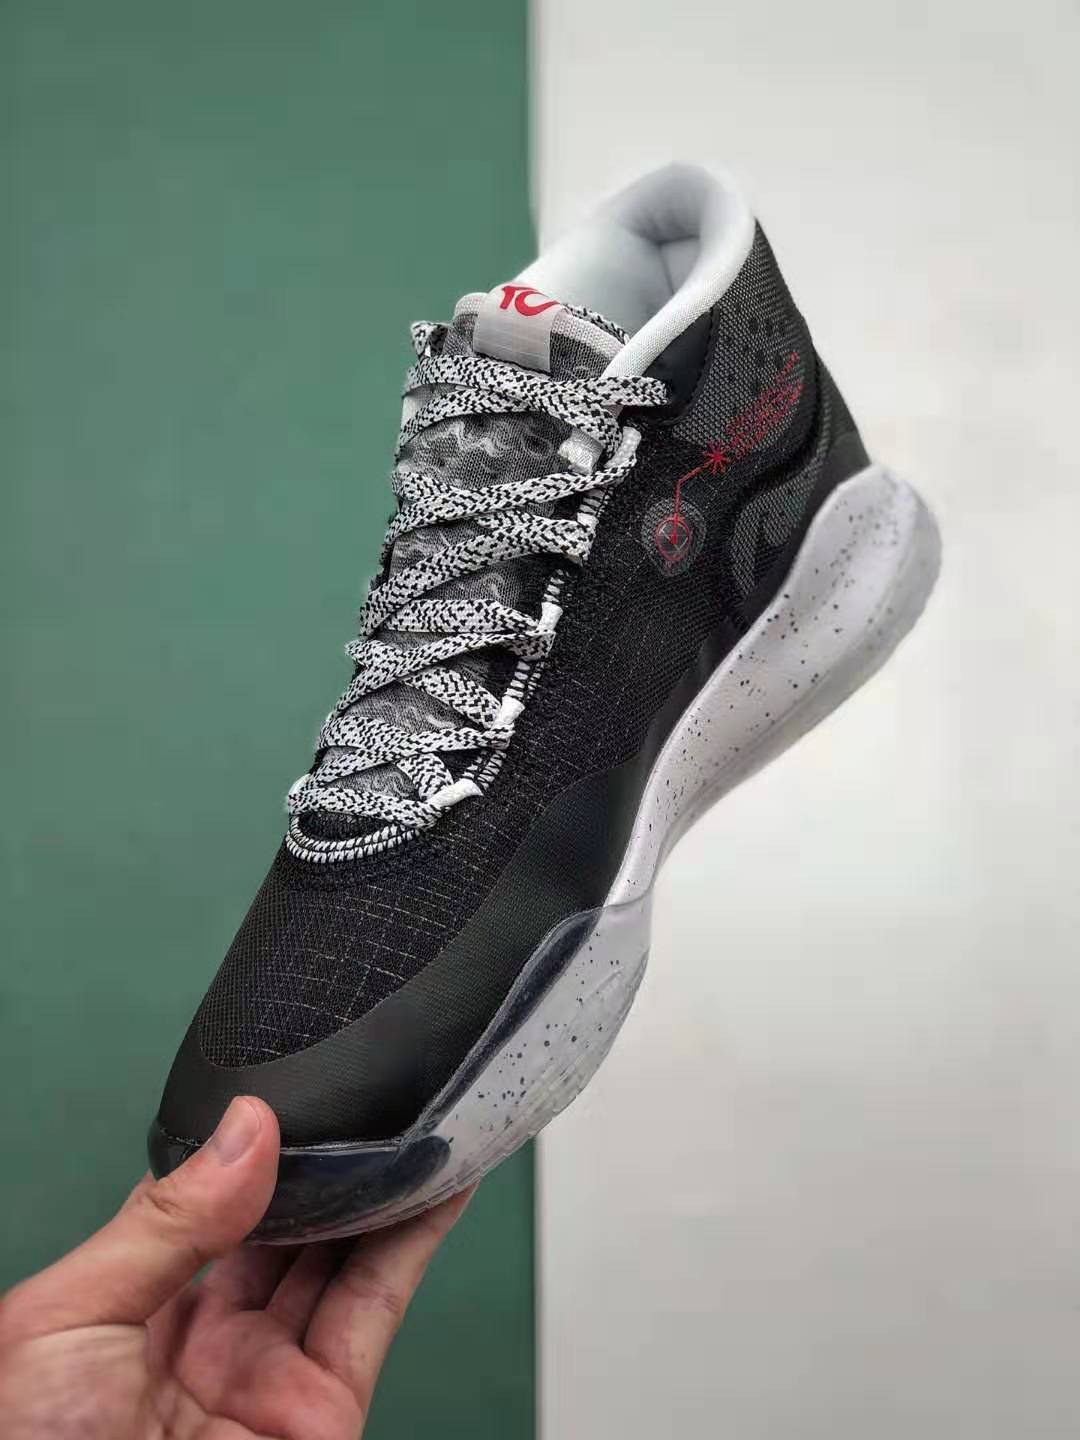 Nike Zoom KD 12 EP 'Black Cement' AR4230-002 - Performance Meets Style in the Latest KD Sneakers